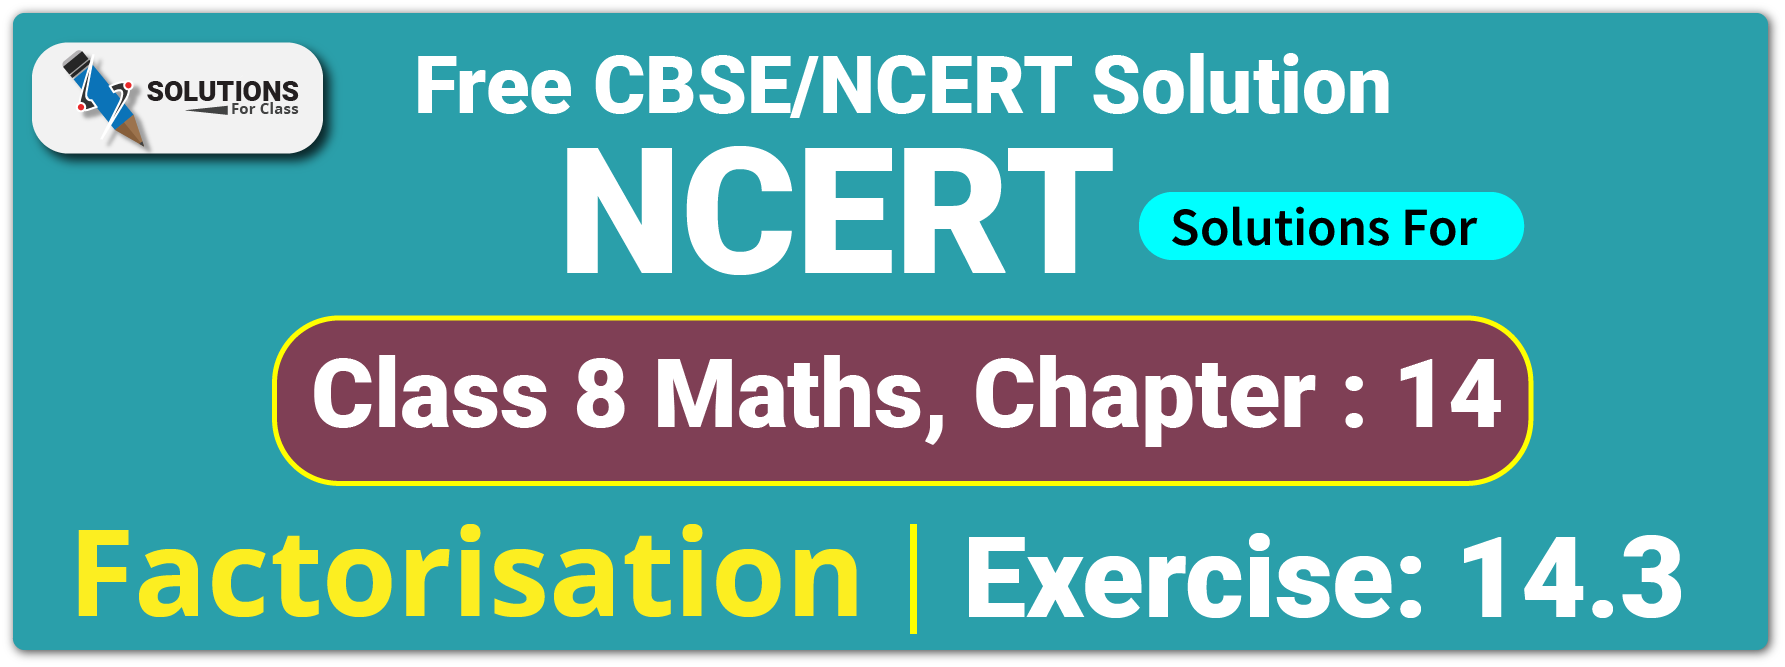 NCERT Solutions For Class 8 Chapter 14, Factorisation, Exercise14.3